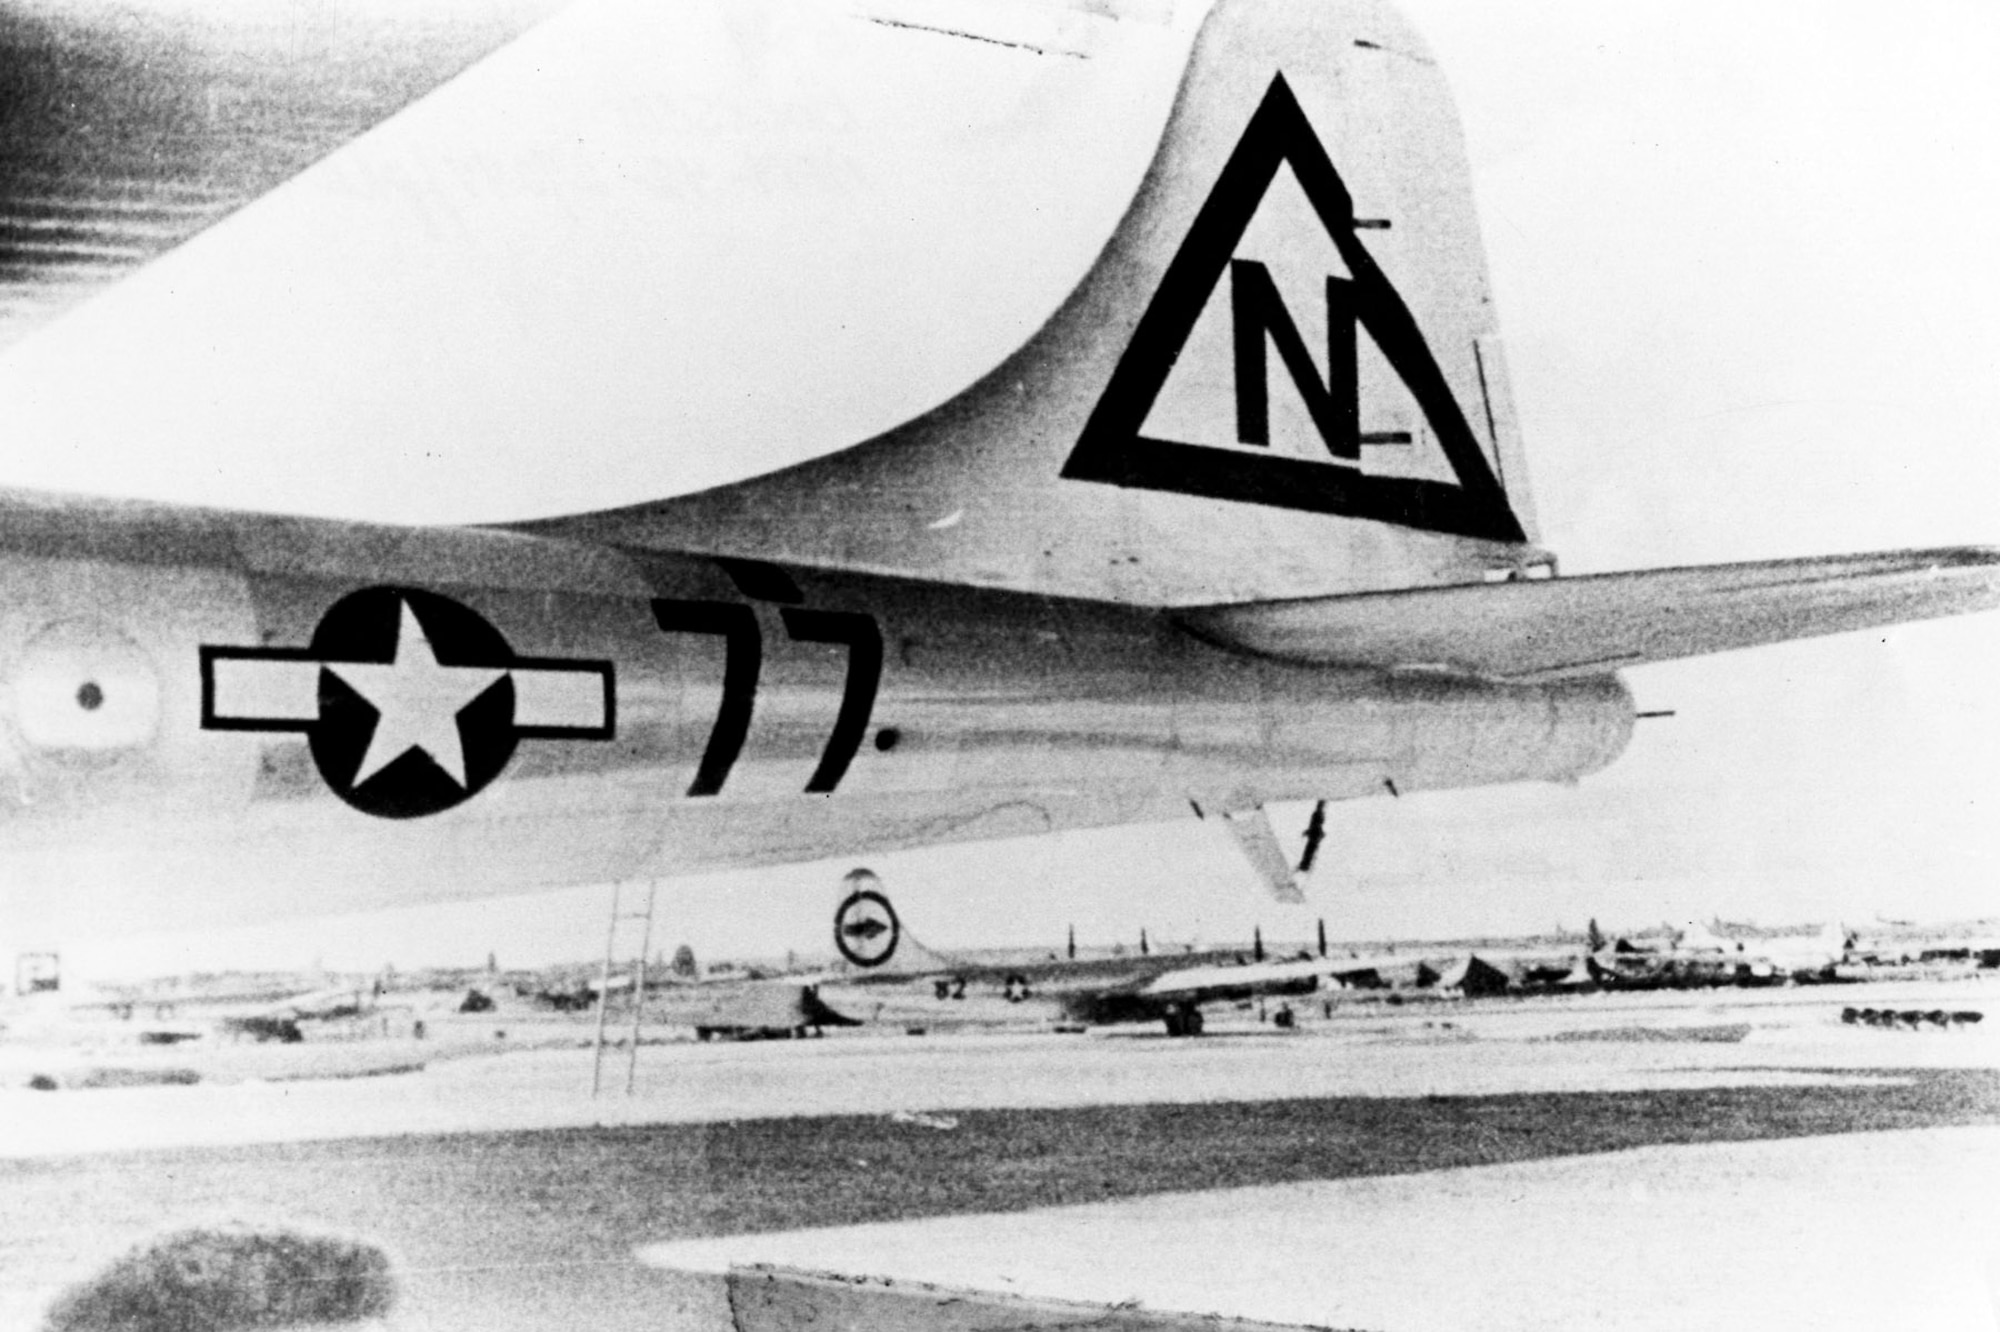 "Bockcar" tail section, showing temporary markings replacing those of the 509th on Tinian to confuse the enemy. (U.S. Air Force photo)